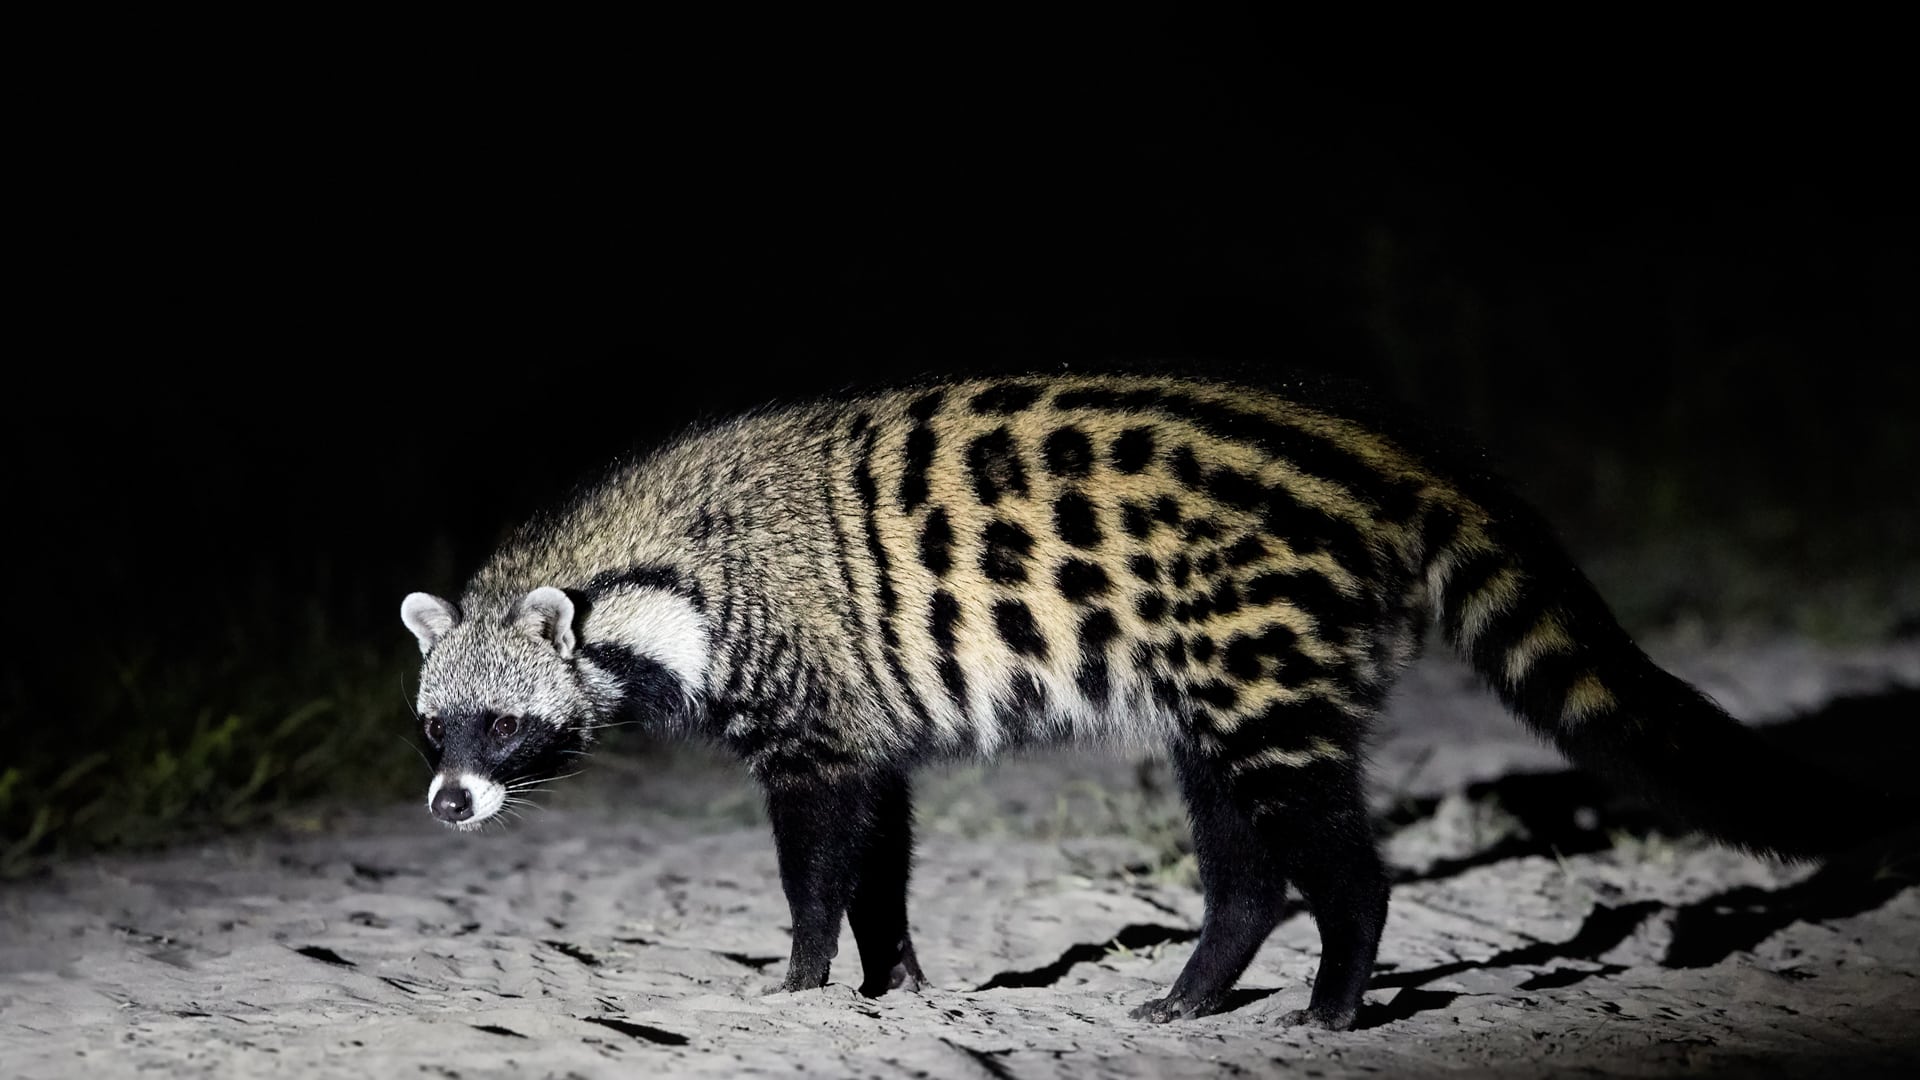 A civet lit up in the road during a safari – one of Africa’s most elusive safari animals.